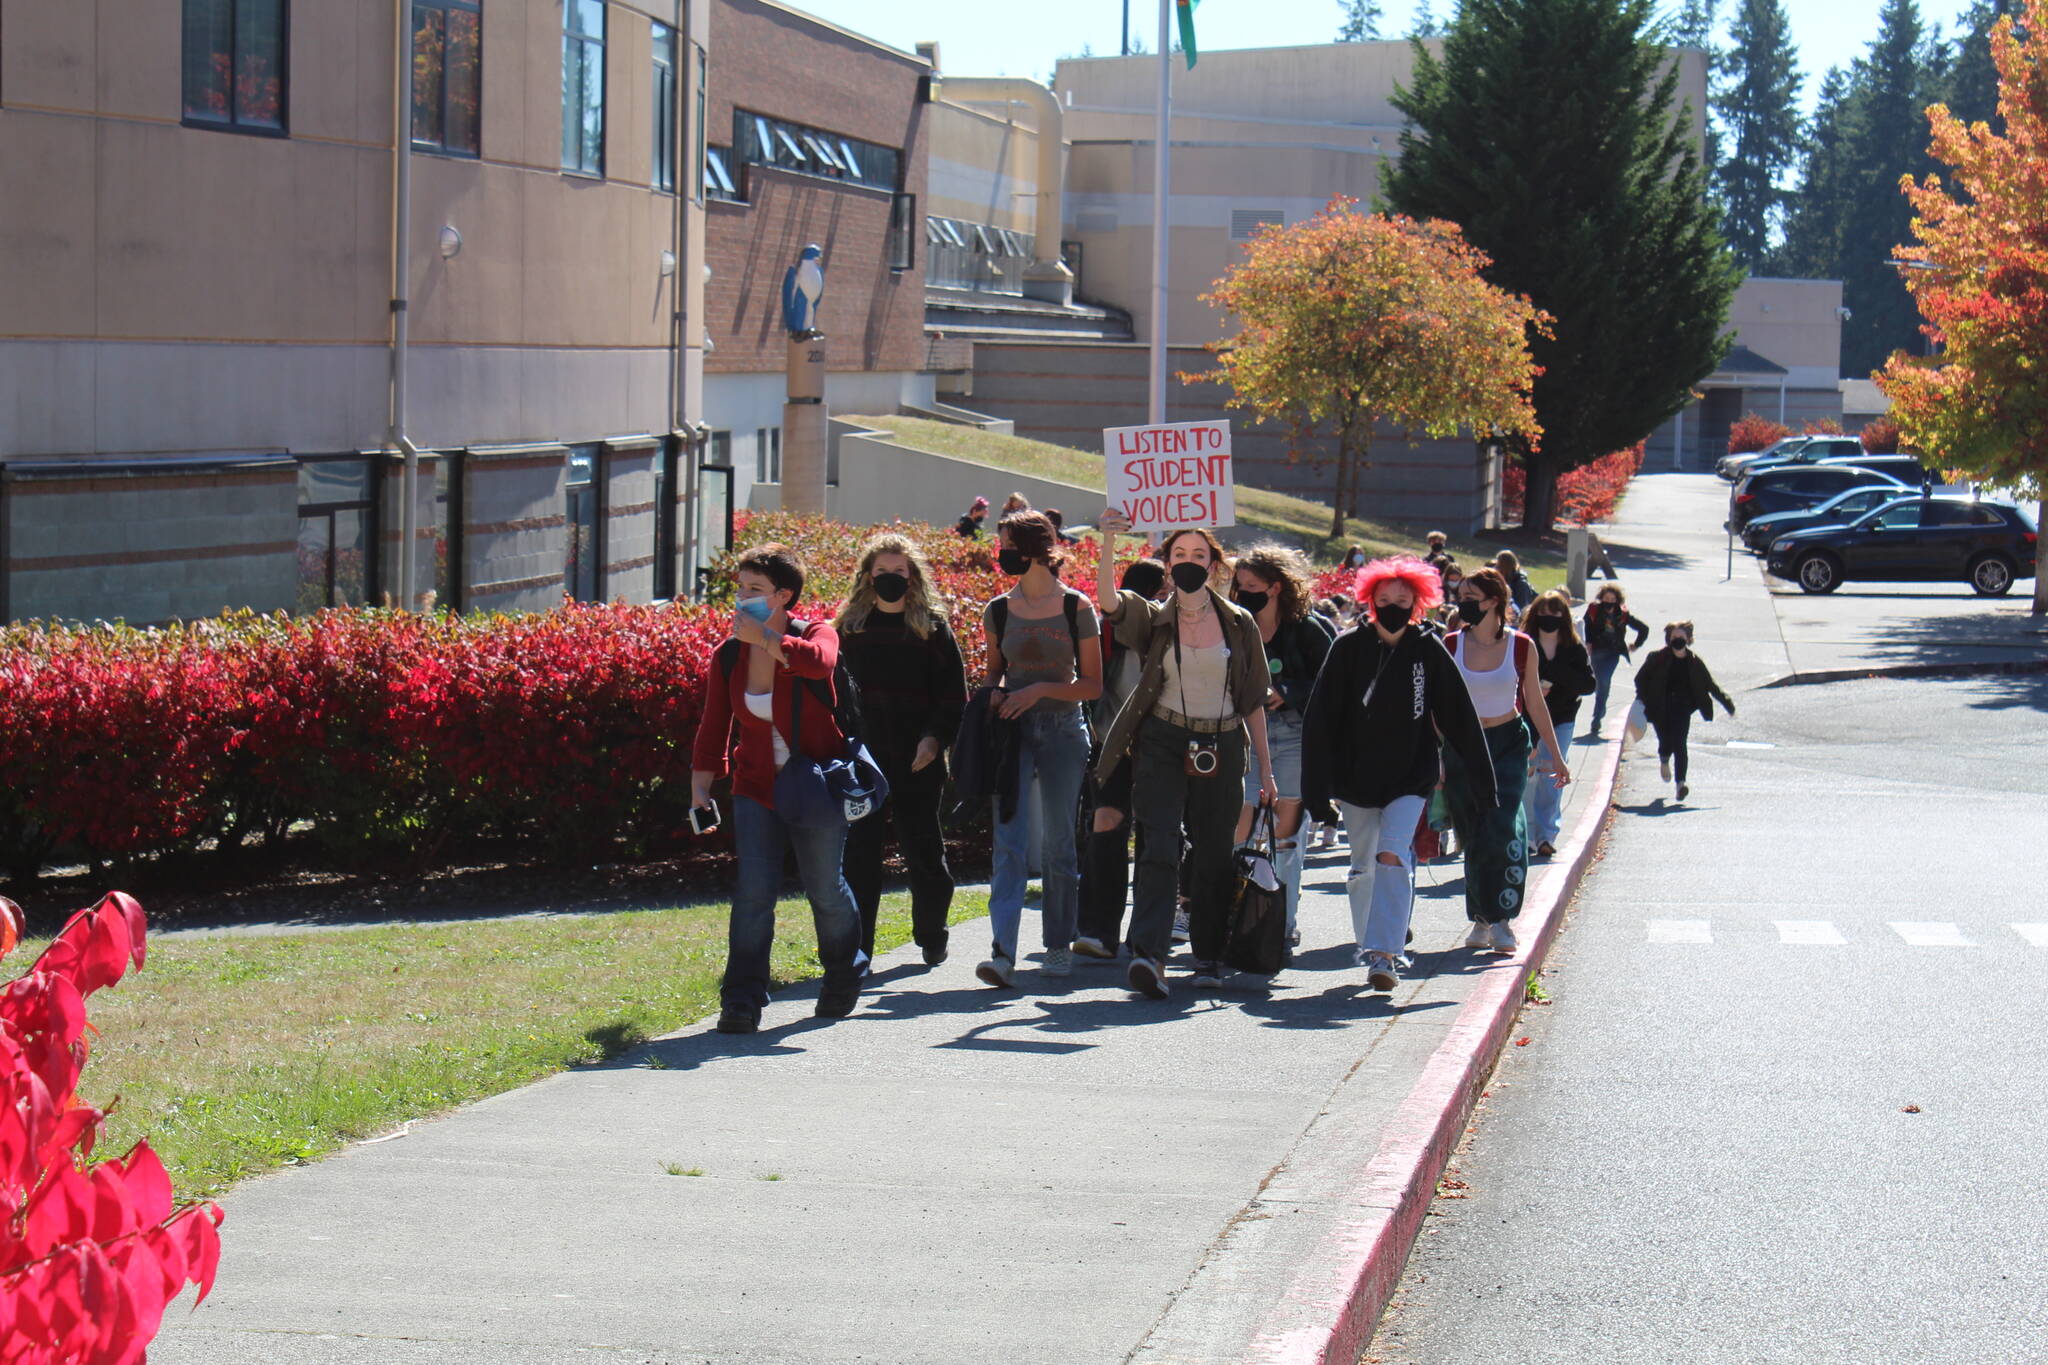 The first wave of students walks out of South Whidbey High School to protest inaction over climate change. (Photo by Karina Andrew/Whidbey News-Times)